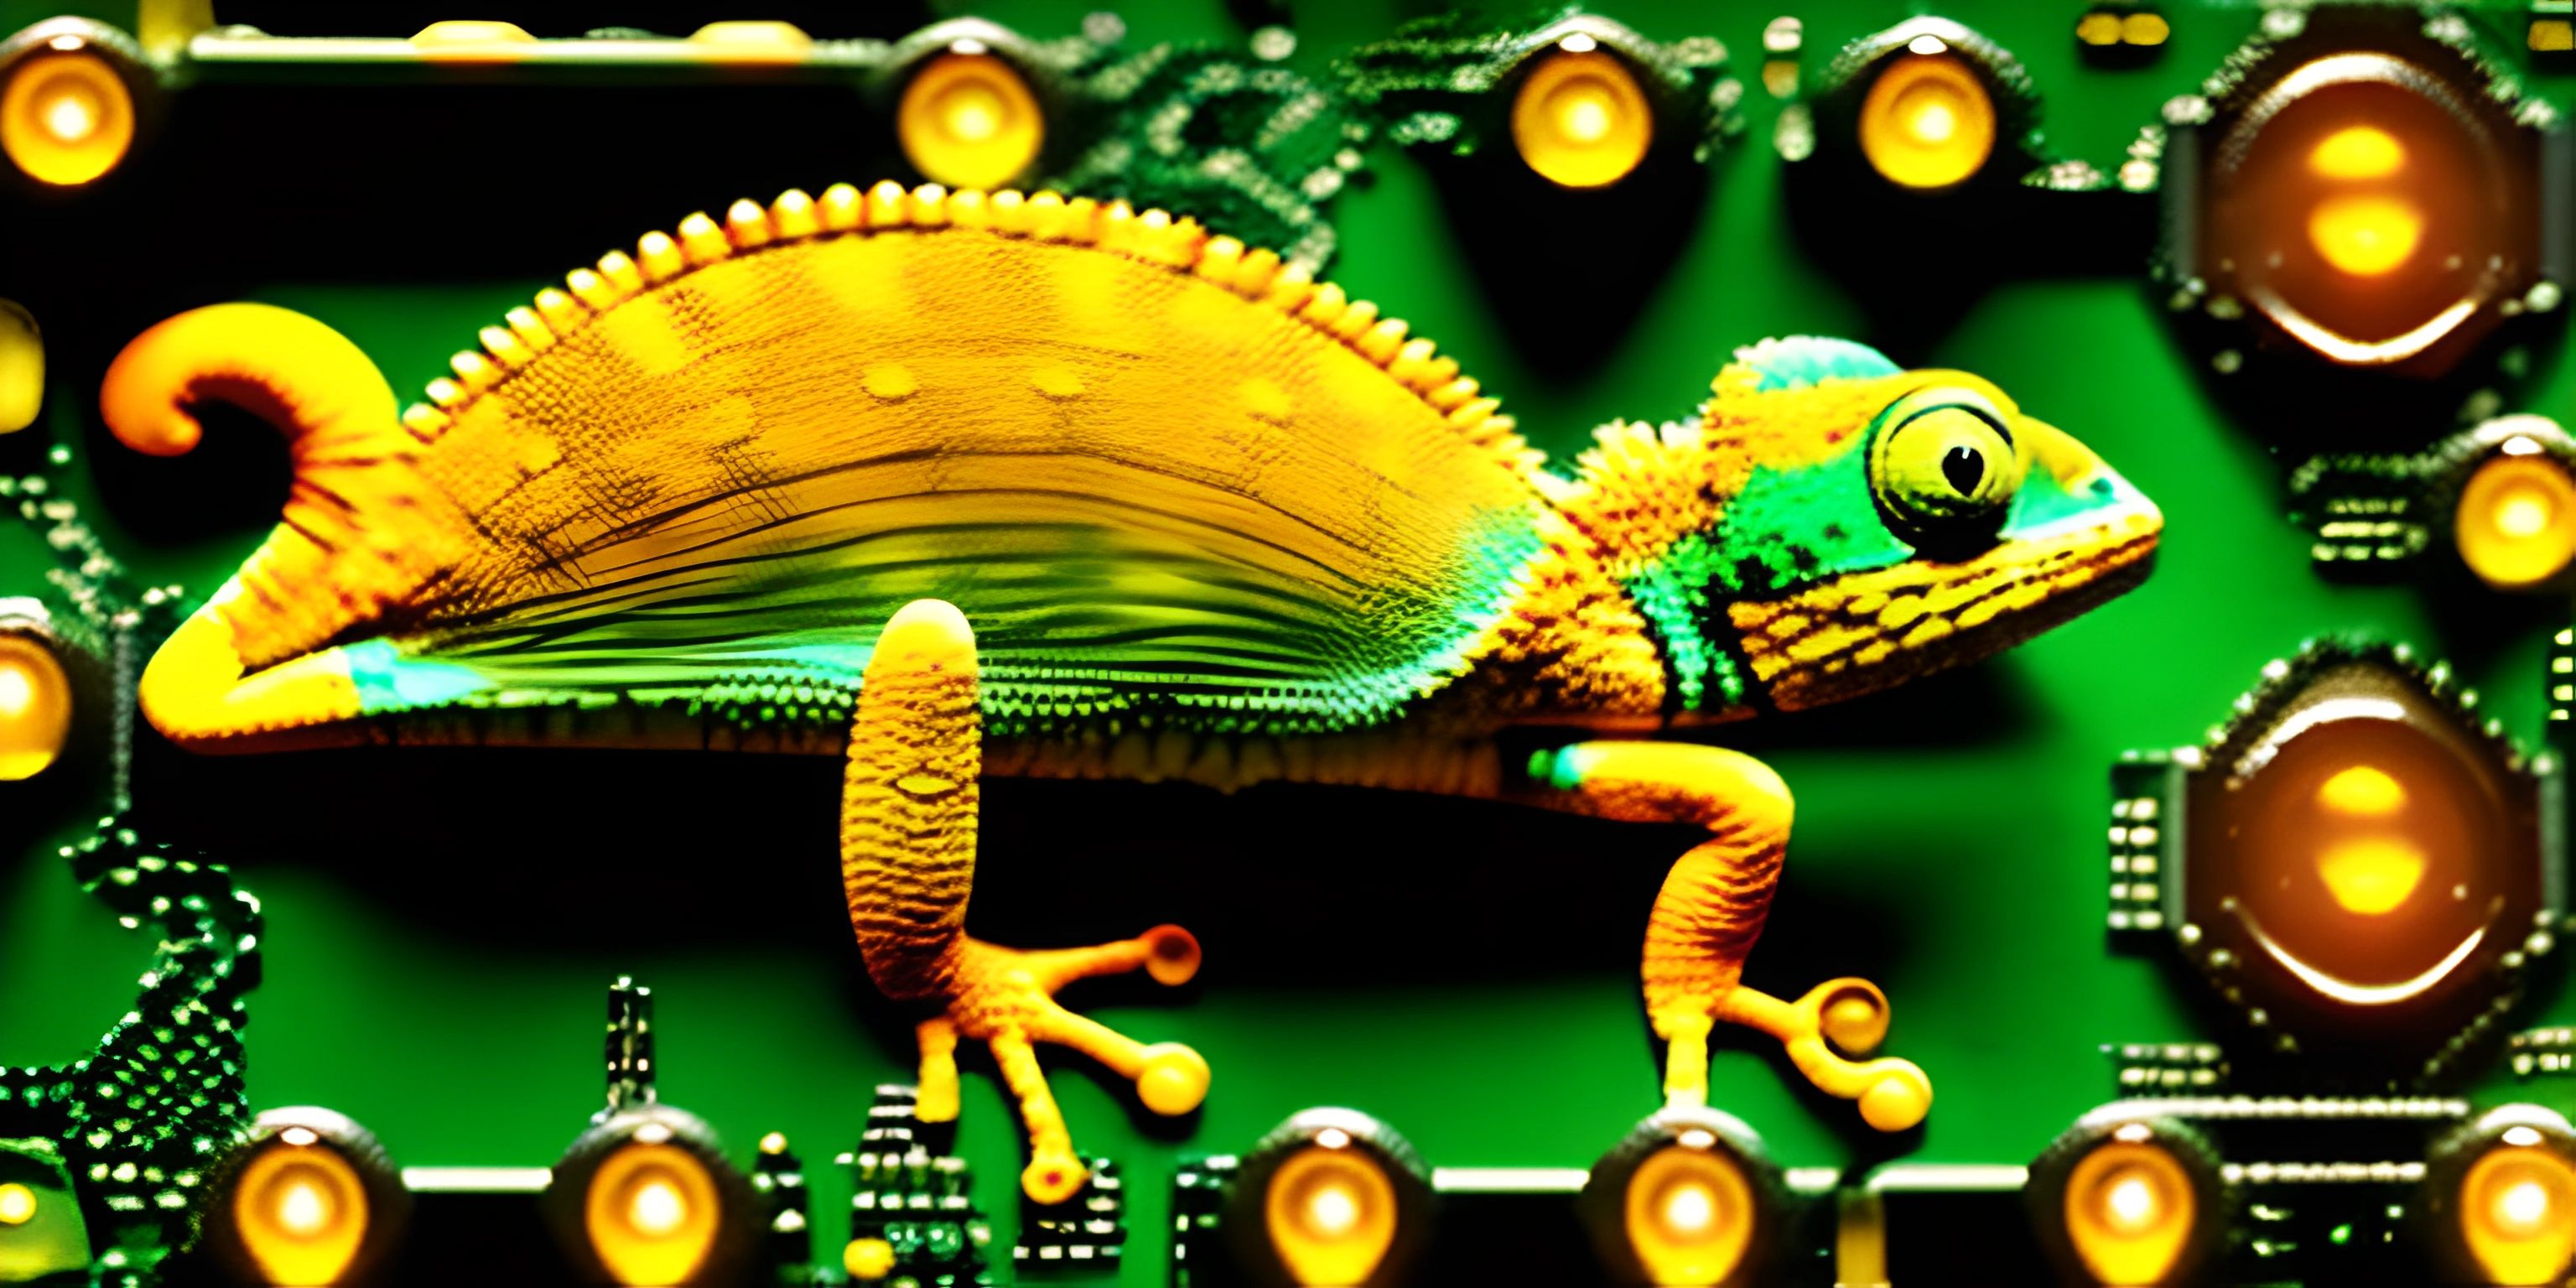 lizard made out of circuit board parts on green surface with gold dots above it and below